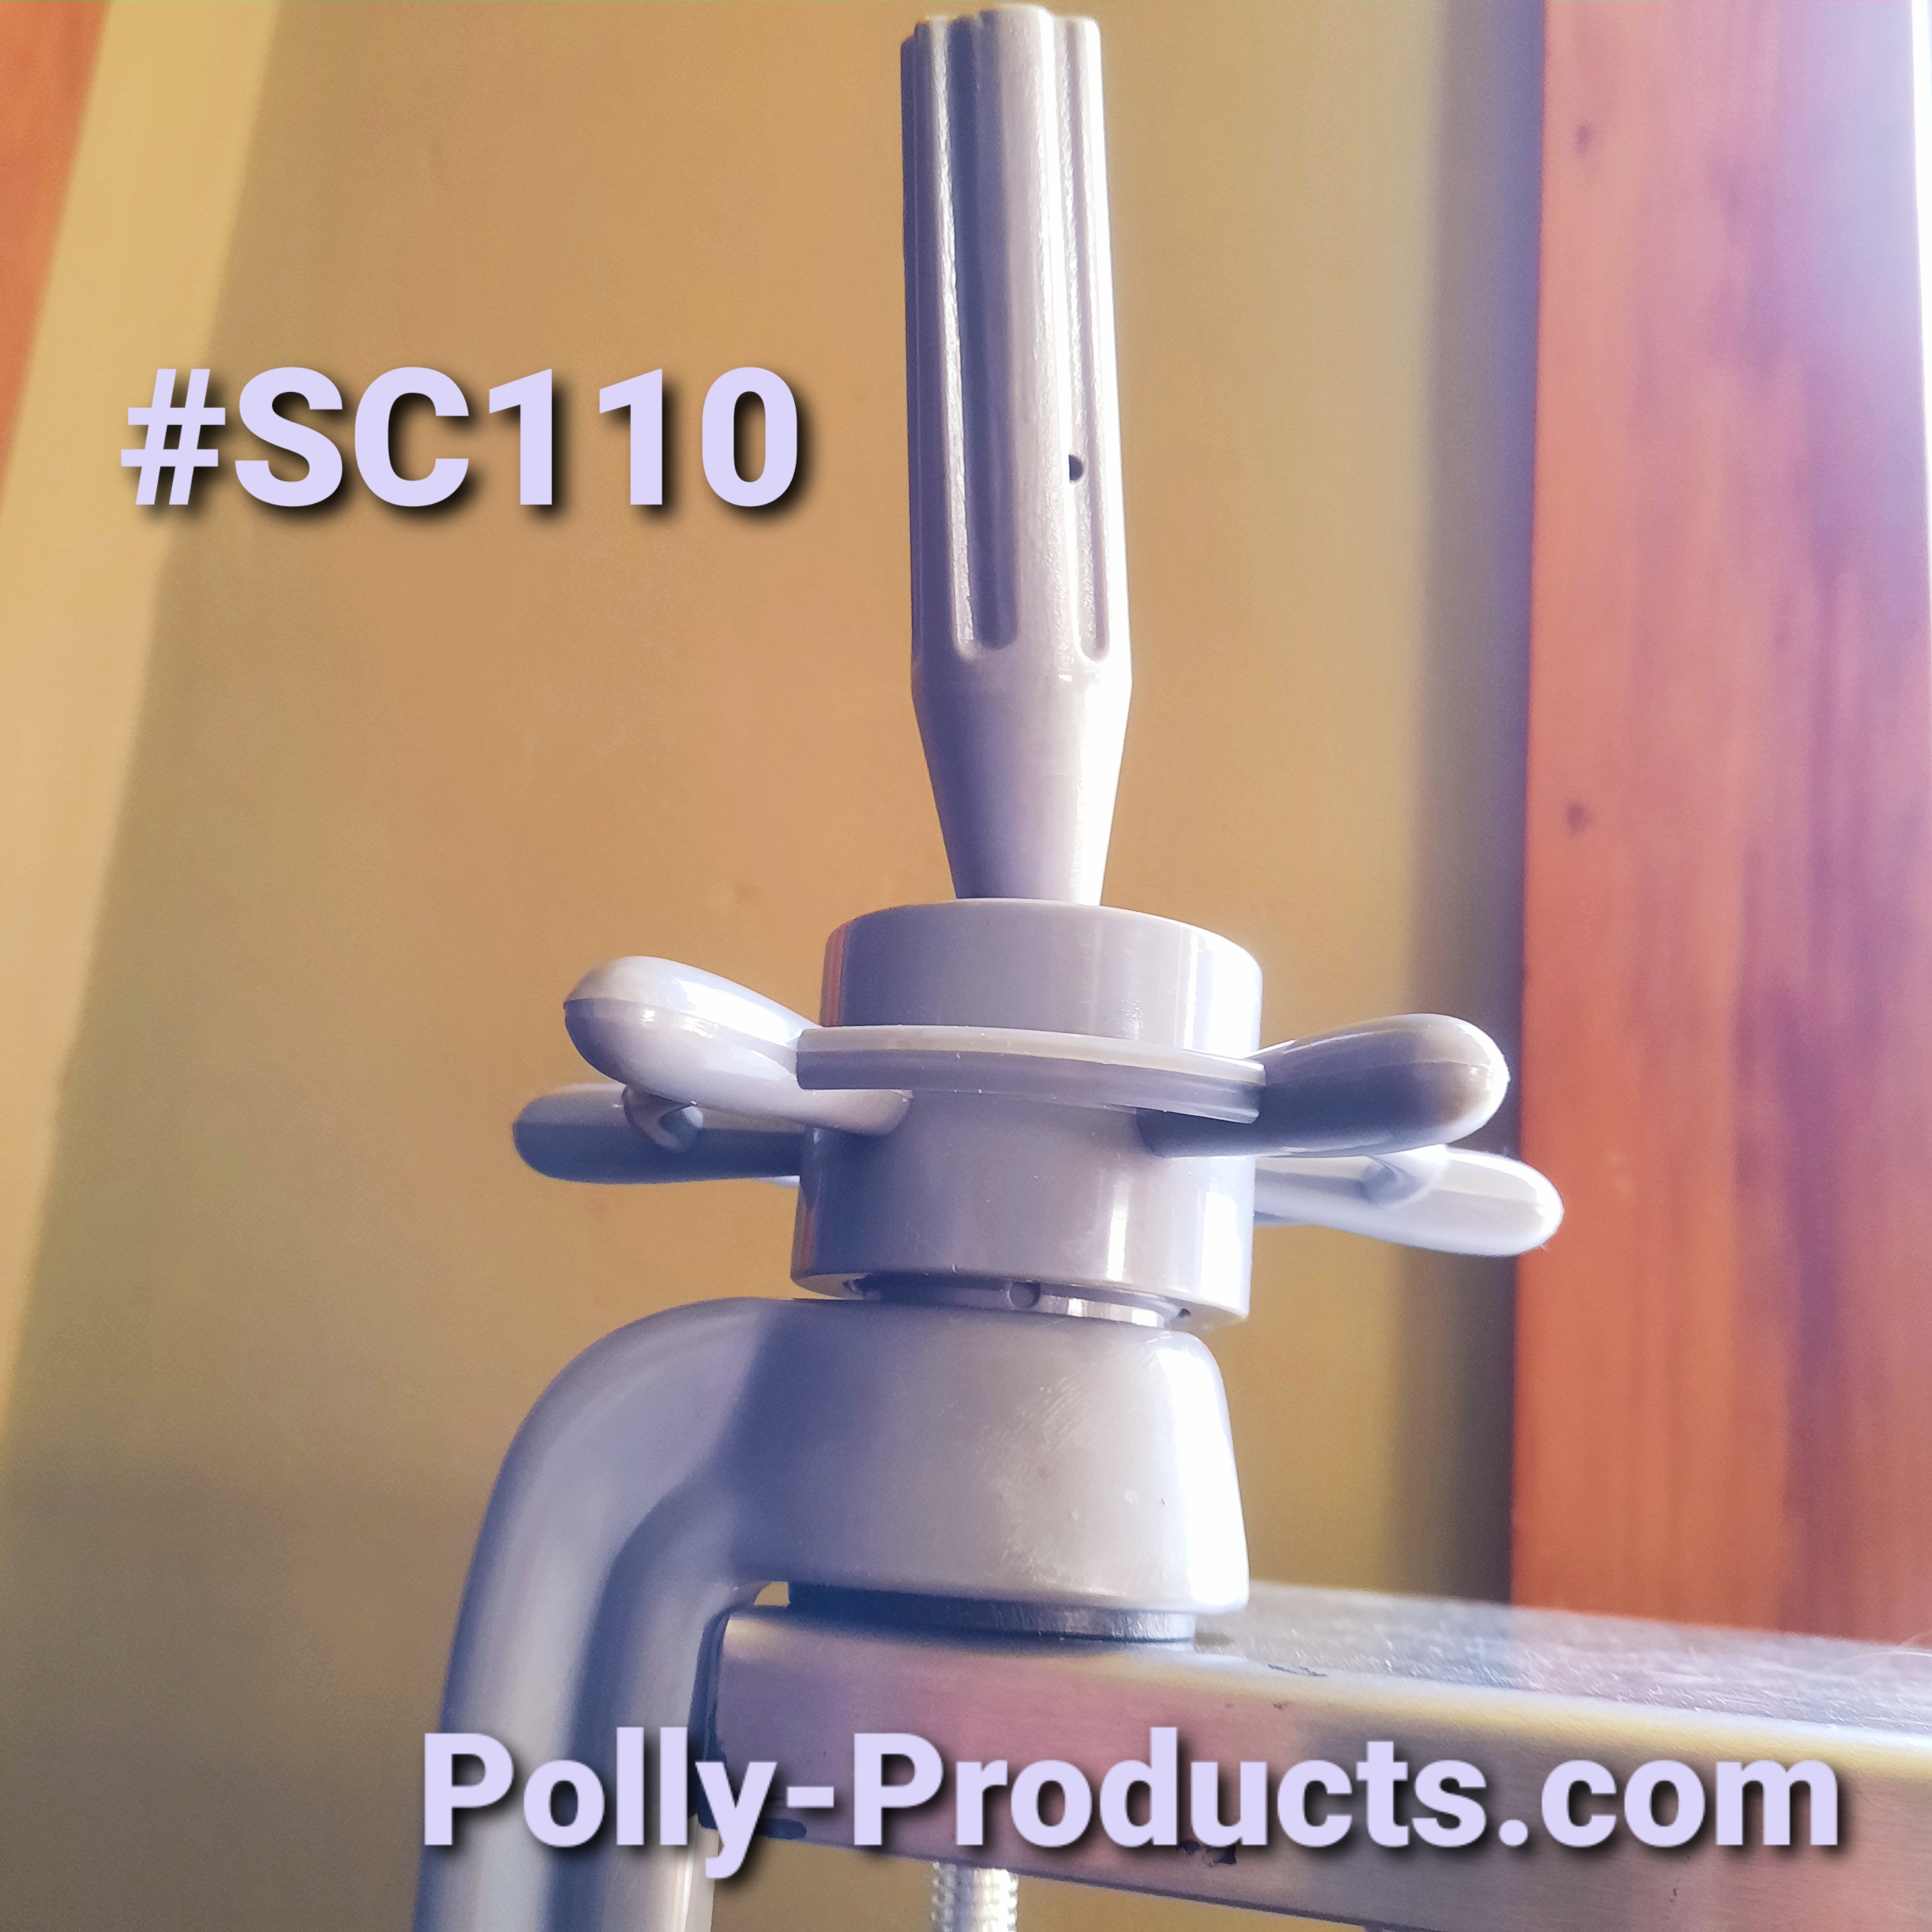 #SC110 STYLING/DISPLAY CLAMP WITH CAPTAIN'S SHIP WHEEL FROM POLLY PRODUCTS COMPANY